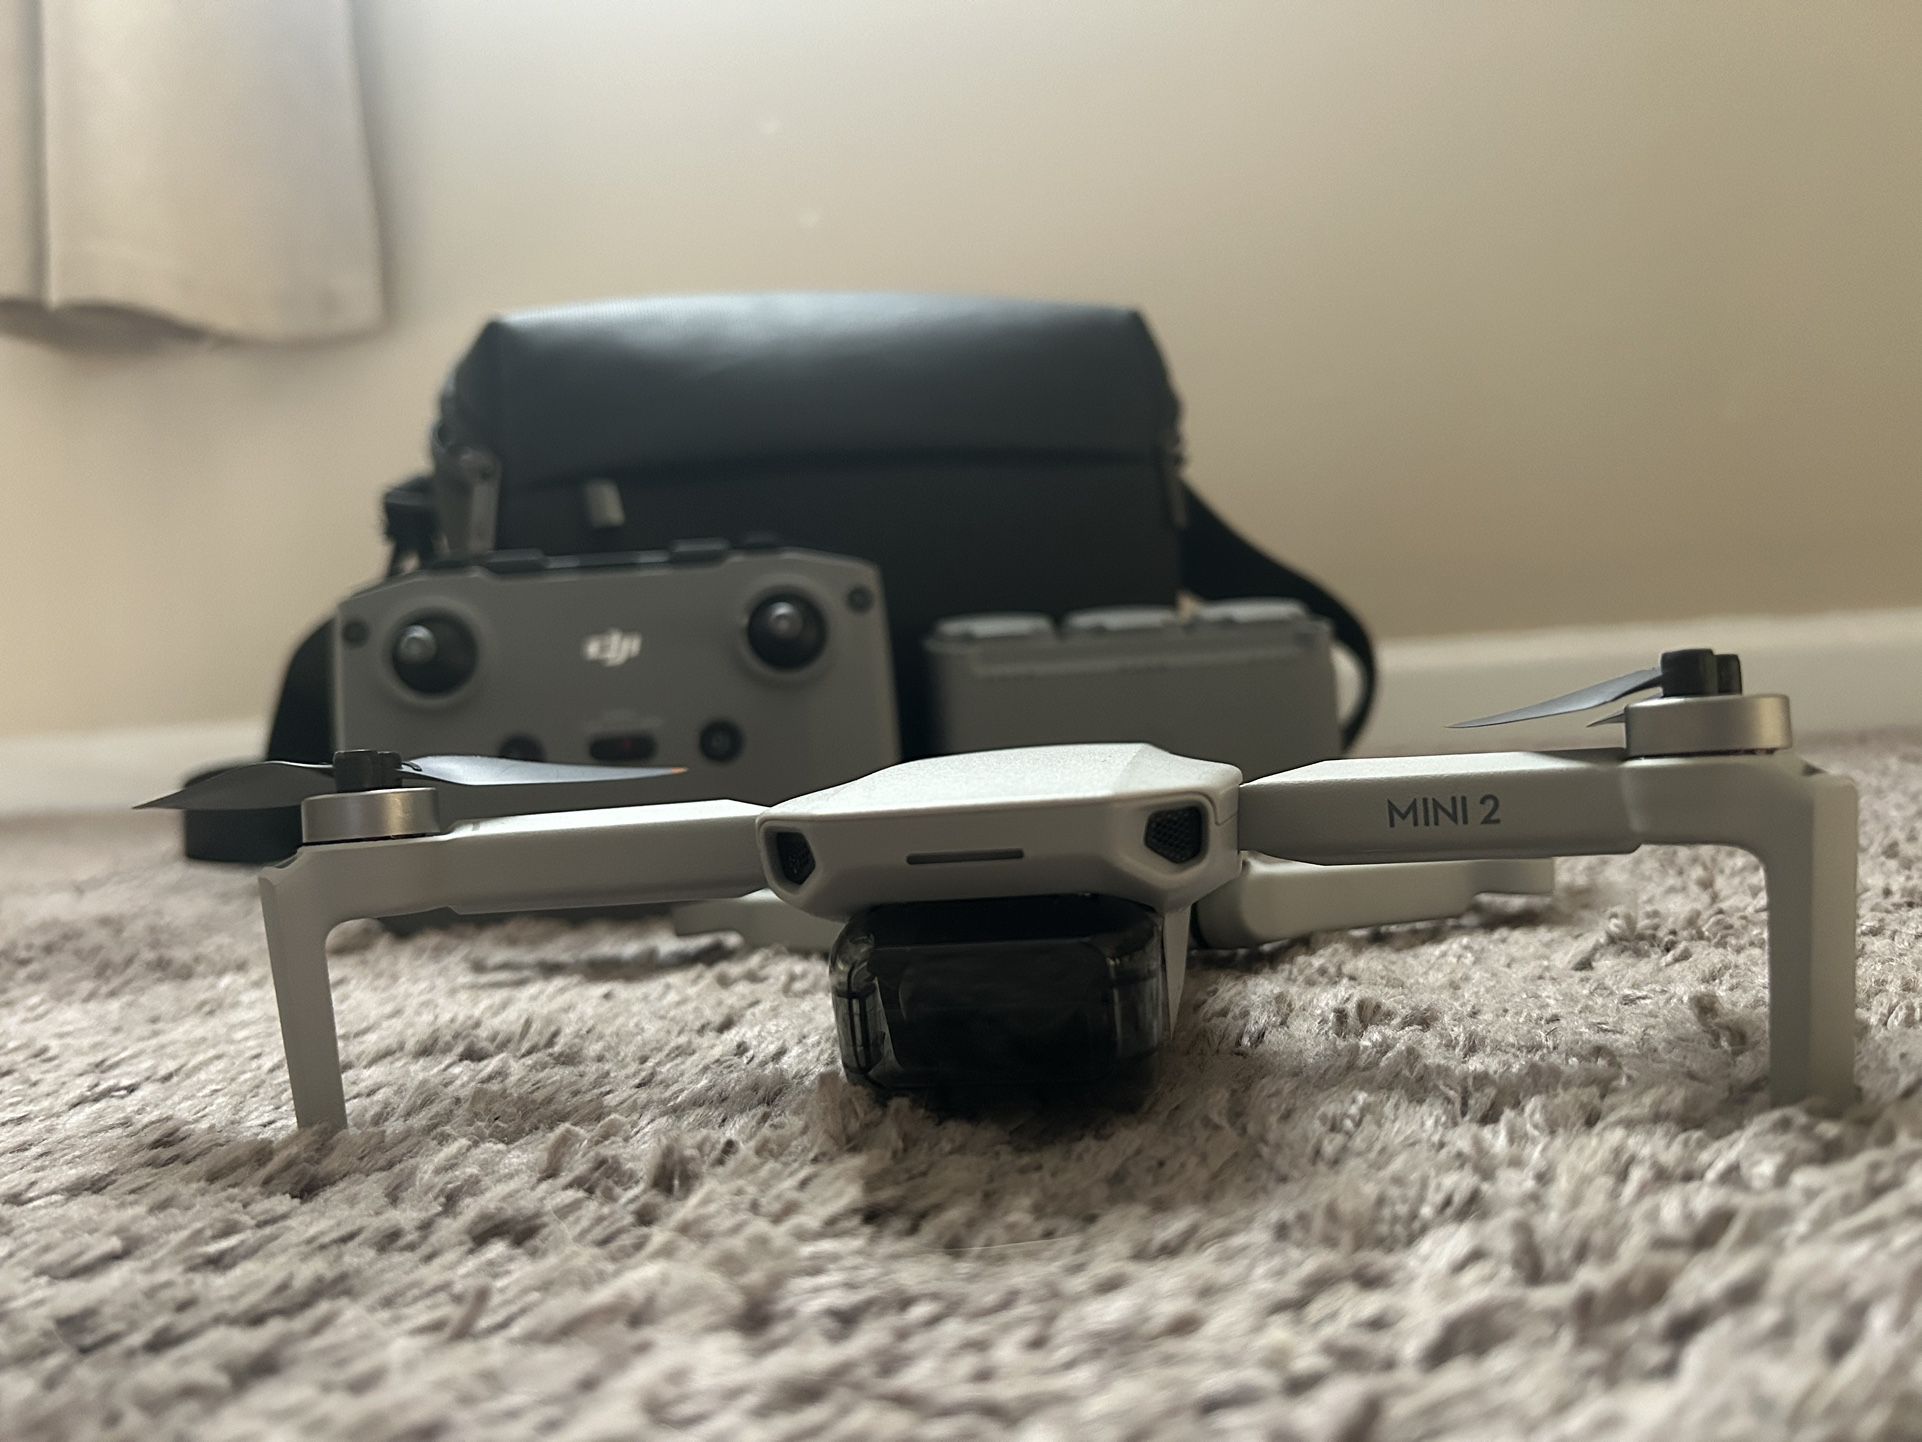 DJI Mini 2 With Controller Chargers And Batteries.